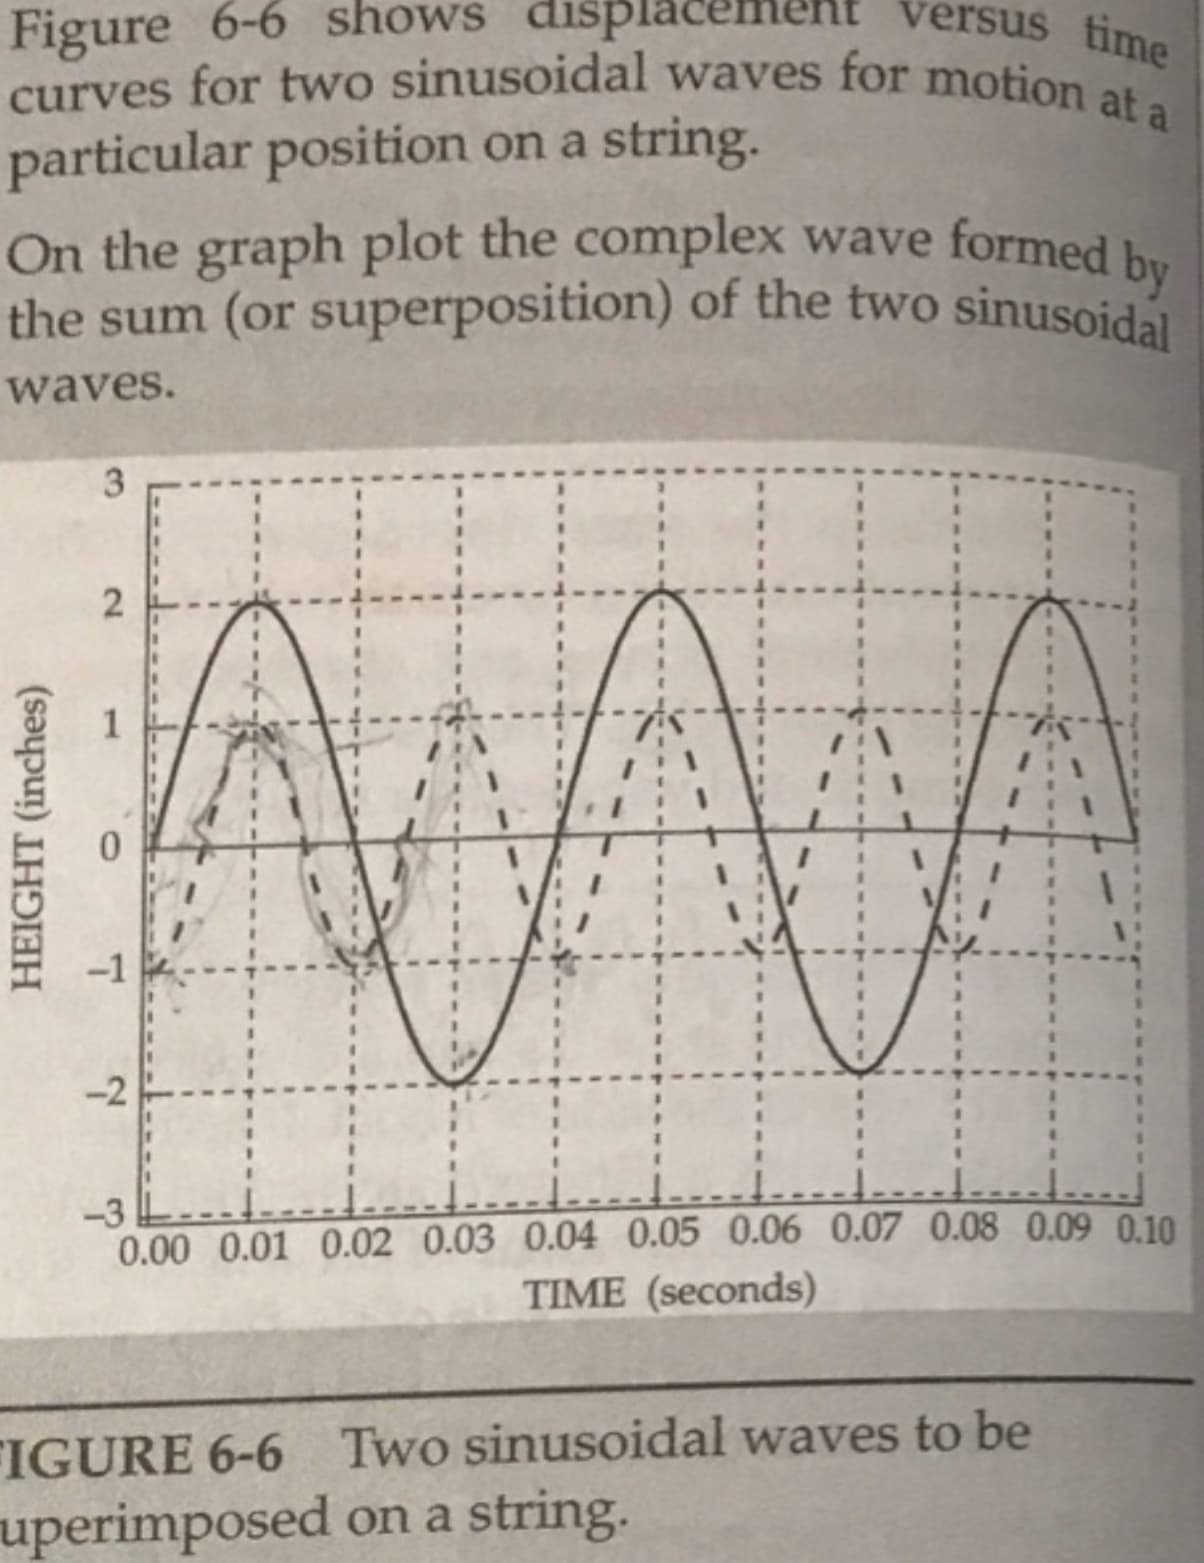 Figure 6-6 shows displaceme
curves for two sinusoidal waves for motion at a
particular position on a string.
On the graph plot the complex wave formed hu
the sum (or superposition) of the two sinusoidal
versus time
waves.
3.
2
-1
-2
-3 L...
0.00 0.01 0.02 0.03 0.04 0.05 0.06 0.07 0.08 0.09 0.10
TIME (seconds)
Two sinusoidal waves to be
FIGURE 6-6
uperimposed on a string.
HEIGHT (inches)
